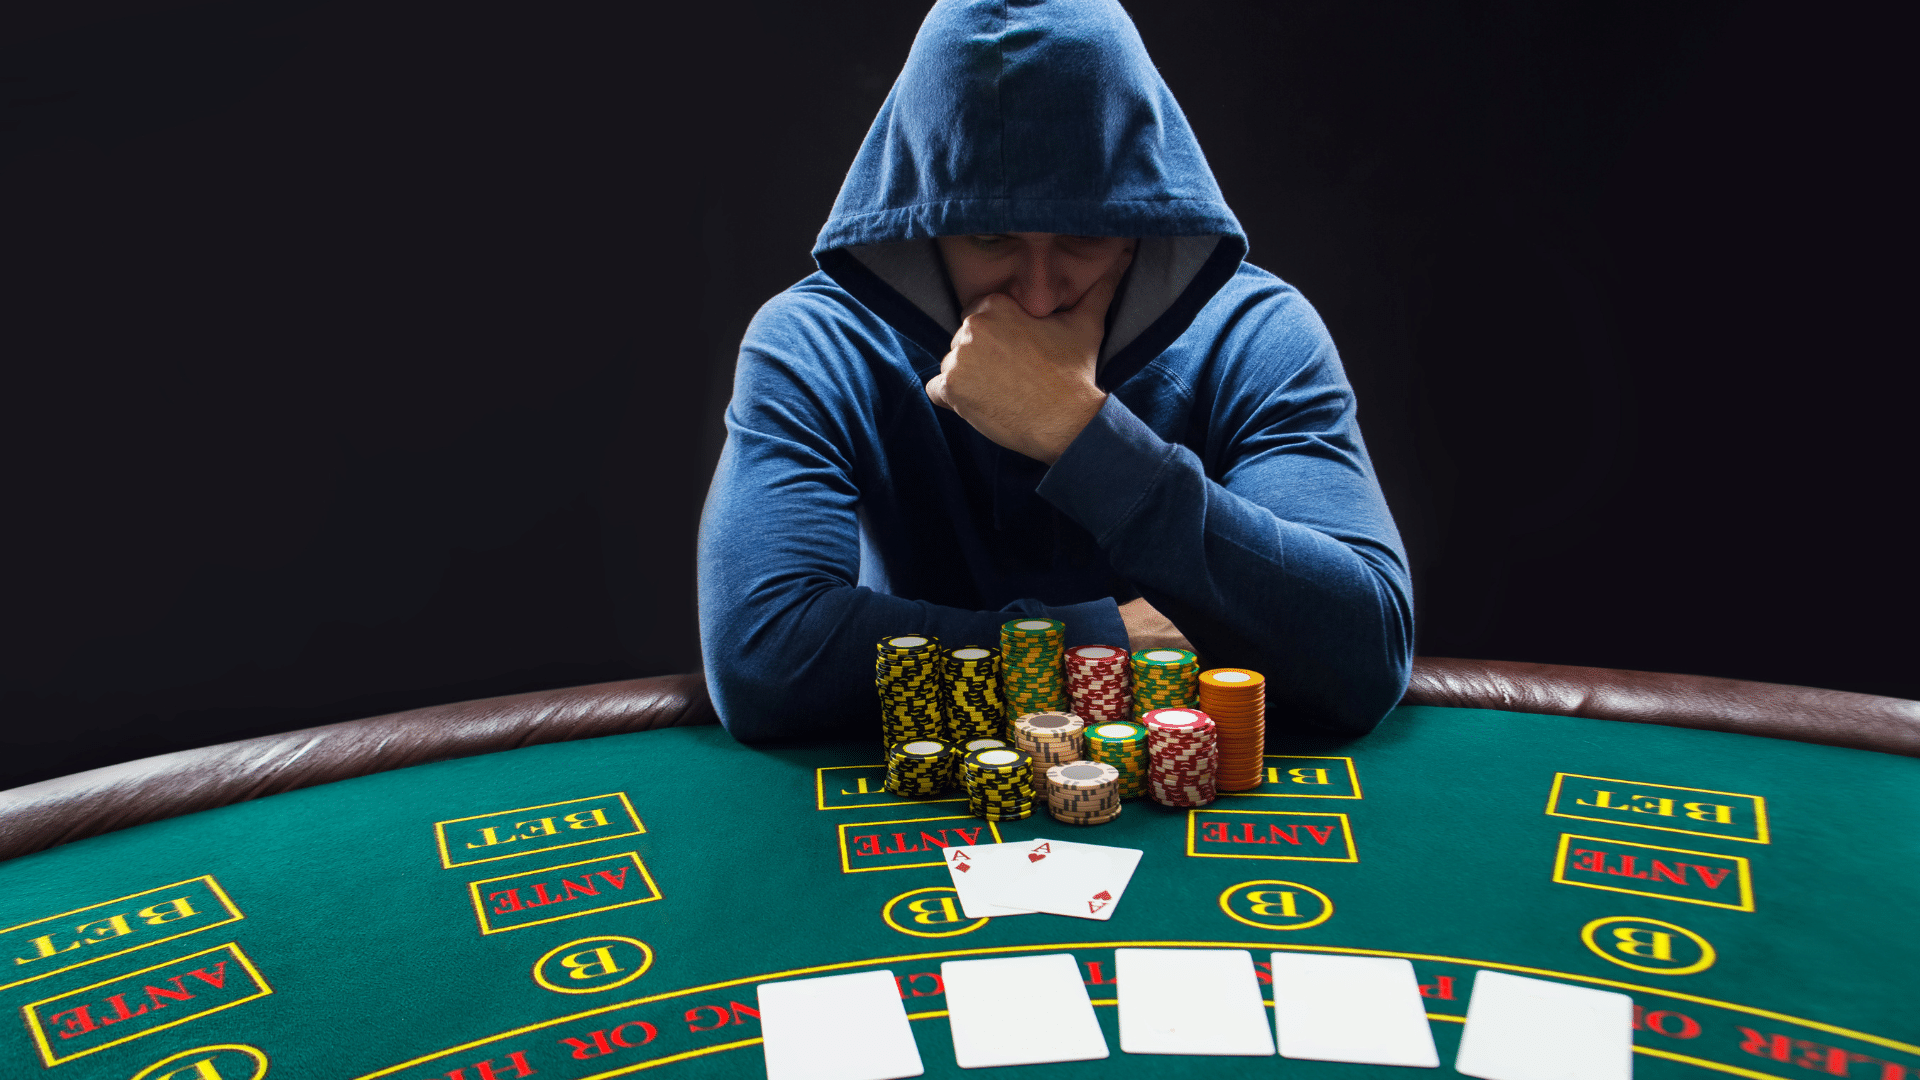 Guy playing poker and thinking